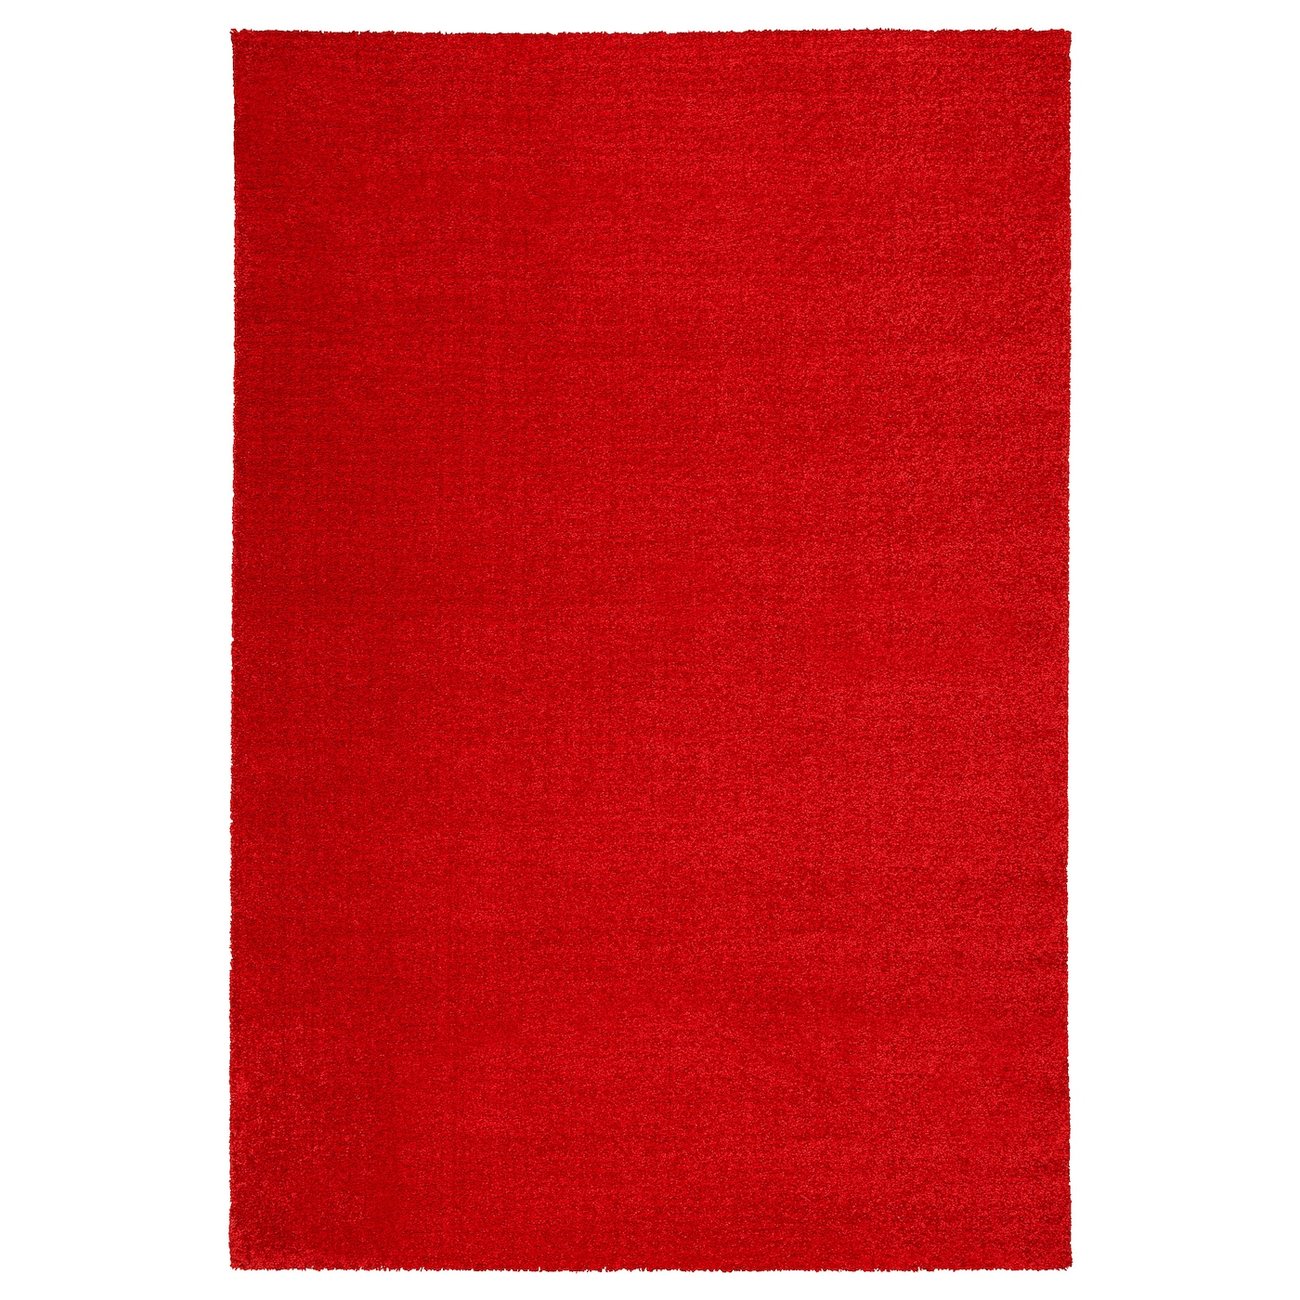 LANGSTED Teppich Kurzflor - rot 133x195 cm